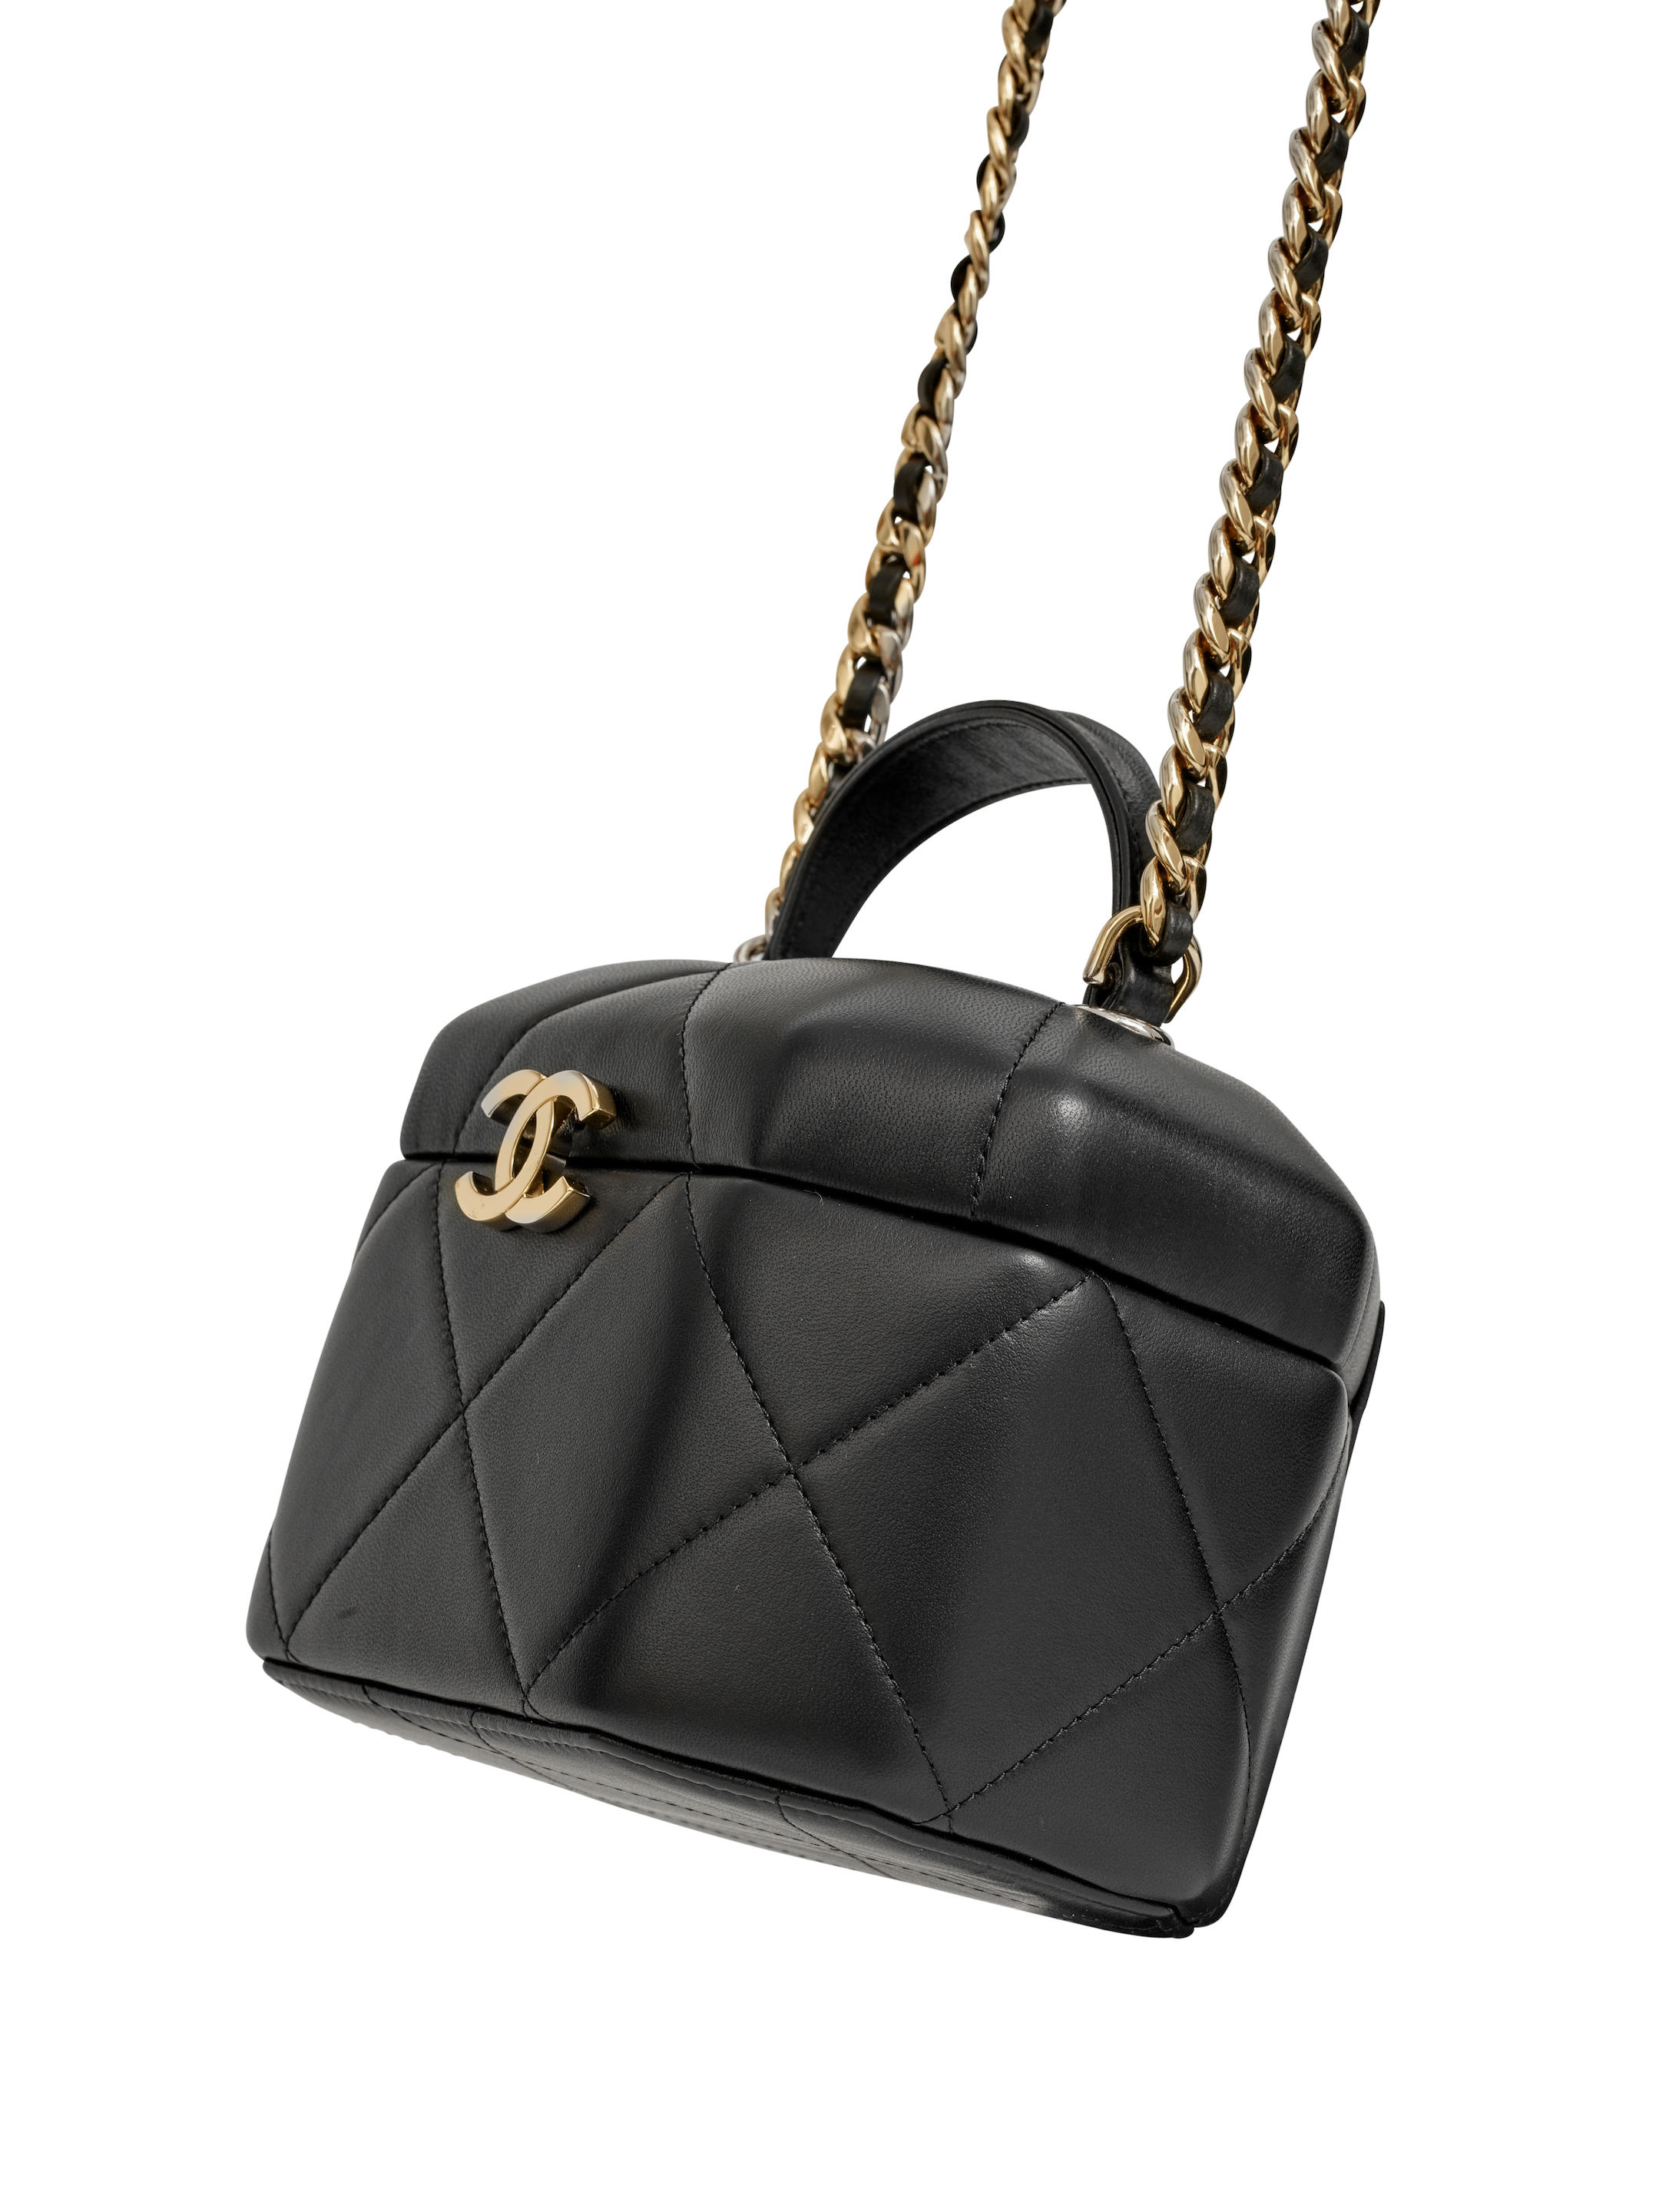 Bonhams : Chanel Black Lambskin Small Vanity Case with Gold Hardware  (includes dust bag and orignal box)